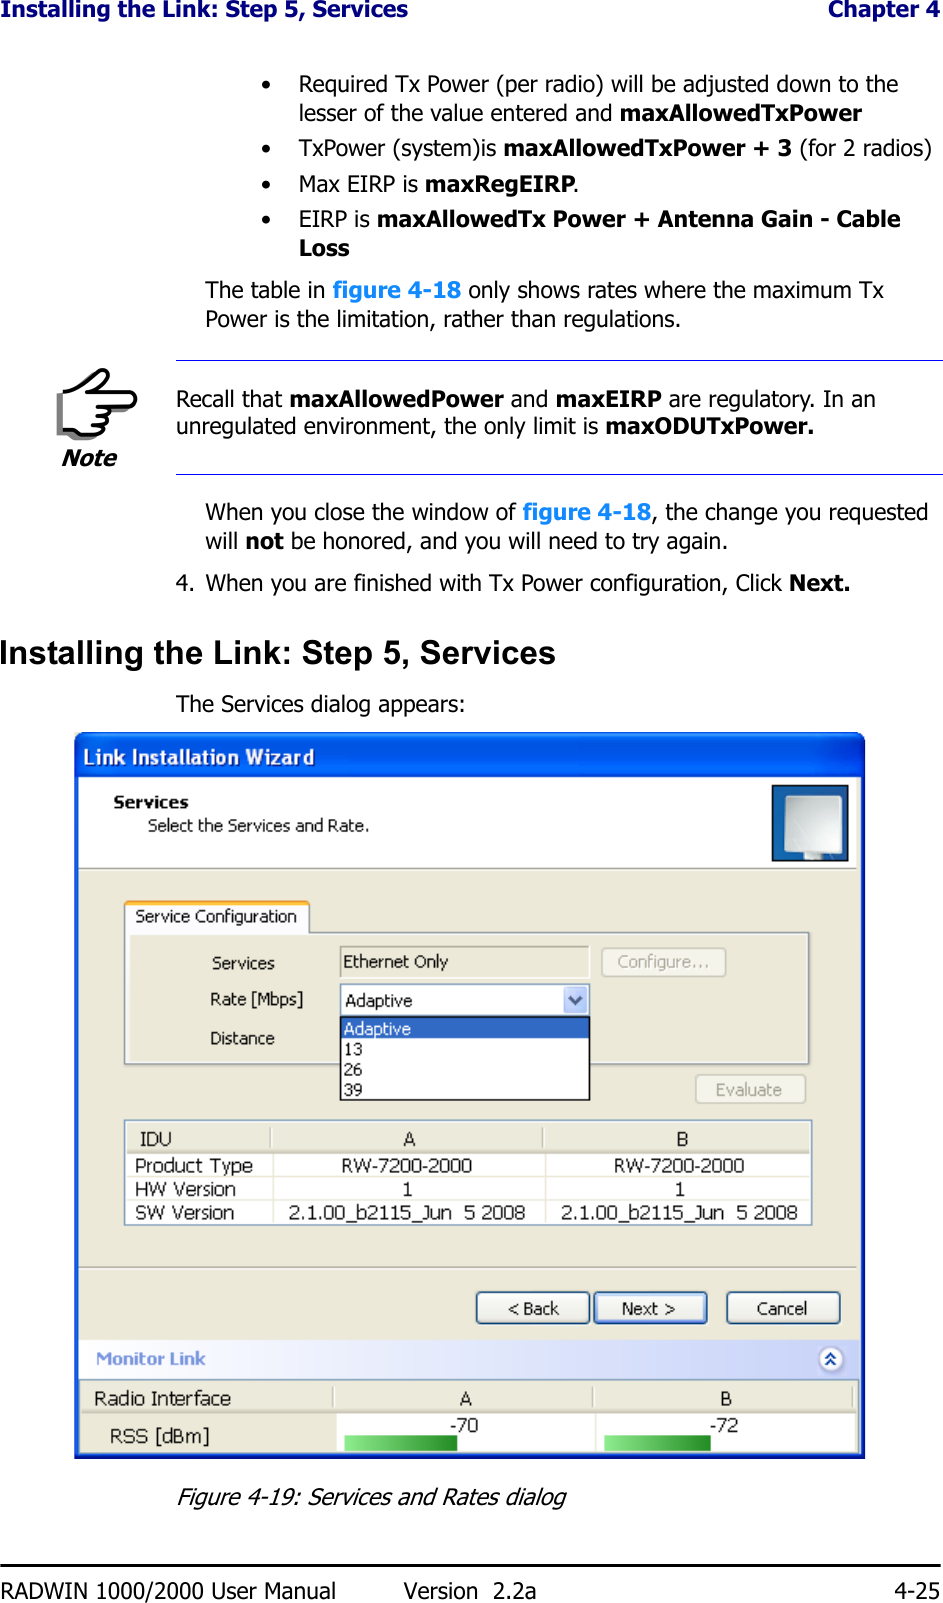 Installing the Link: Step 5, Services  Chapter 4RADWIN 1000/2000 User Manual Version  2.2a 4-25• Required Tx Power (per radio) will be adjusted down to the lesser of the value entered and maxAllowedTxPower•TxPower (system)is maxAllowedTxPower + 3 (for 2 radios)•Max EIRP is maxRegEIRP.•EIRP is maxAllowedTx Power + Antenna Gain - Cable LossThe table in figure 4-18 only shows rates where the maximum Tx Power is the limitation, rather than regulations.When you close the window of figure 4-18, the change you requested will not be honored, and you will need to try again.4. When you are finished with Tx Power configuration, Click Next.Installing the Link: Step 5, ServicesThe Services dialog appears:Figure 4-19: Services and Rates dialogNoteRecall that maxAllowedPower and maxEIRP are regulatory. In an unregulated environment, the only limit is maxODUTxPower.